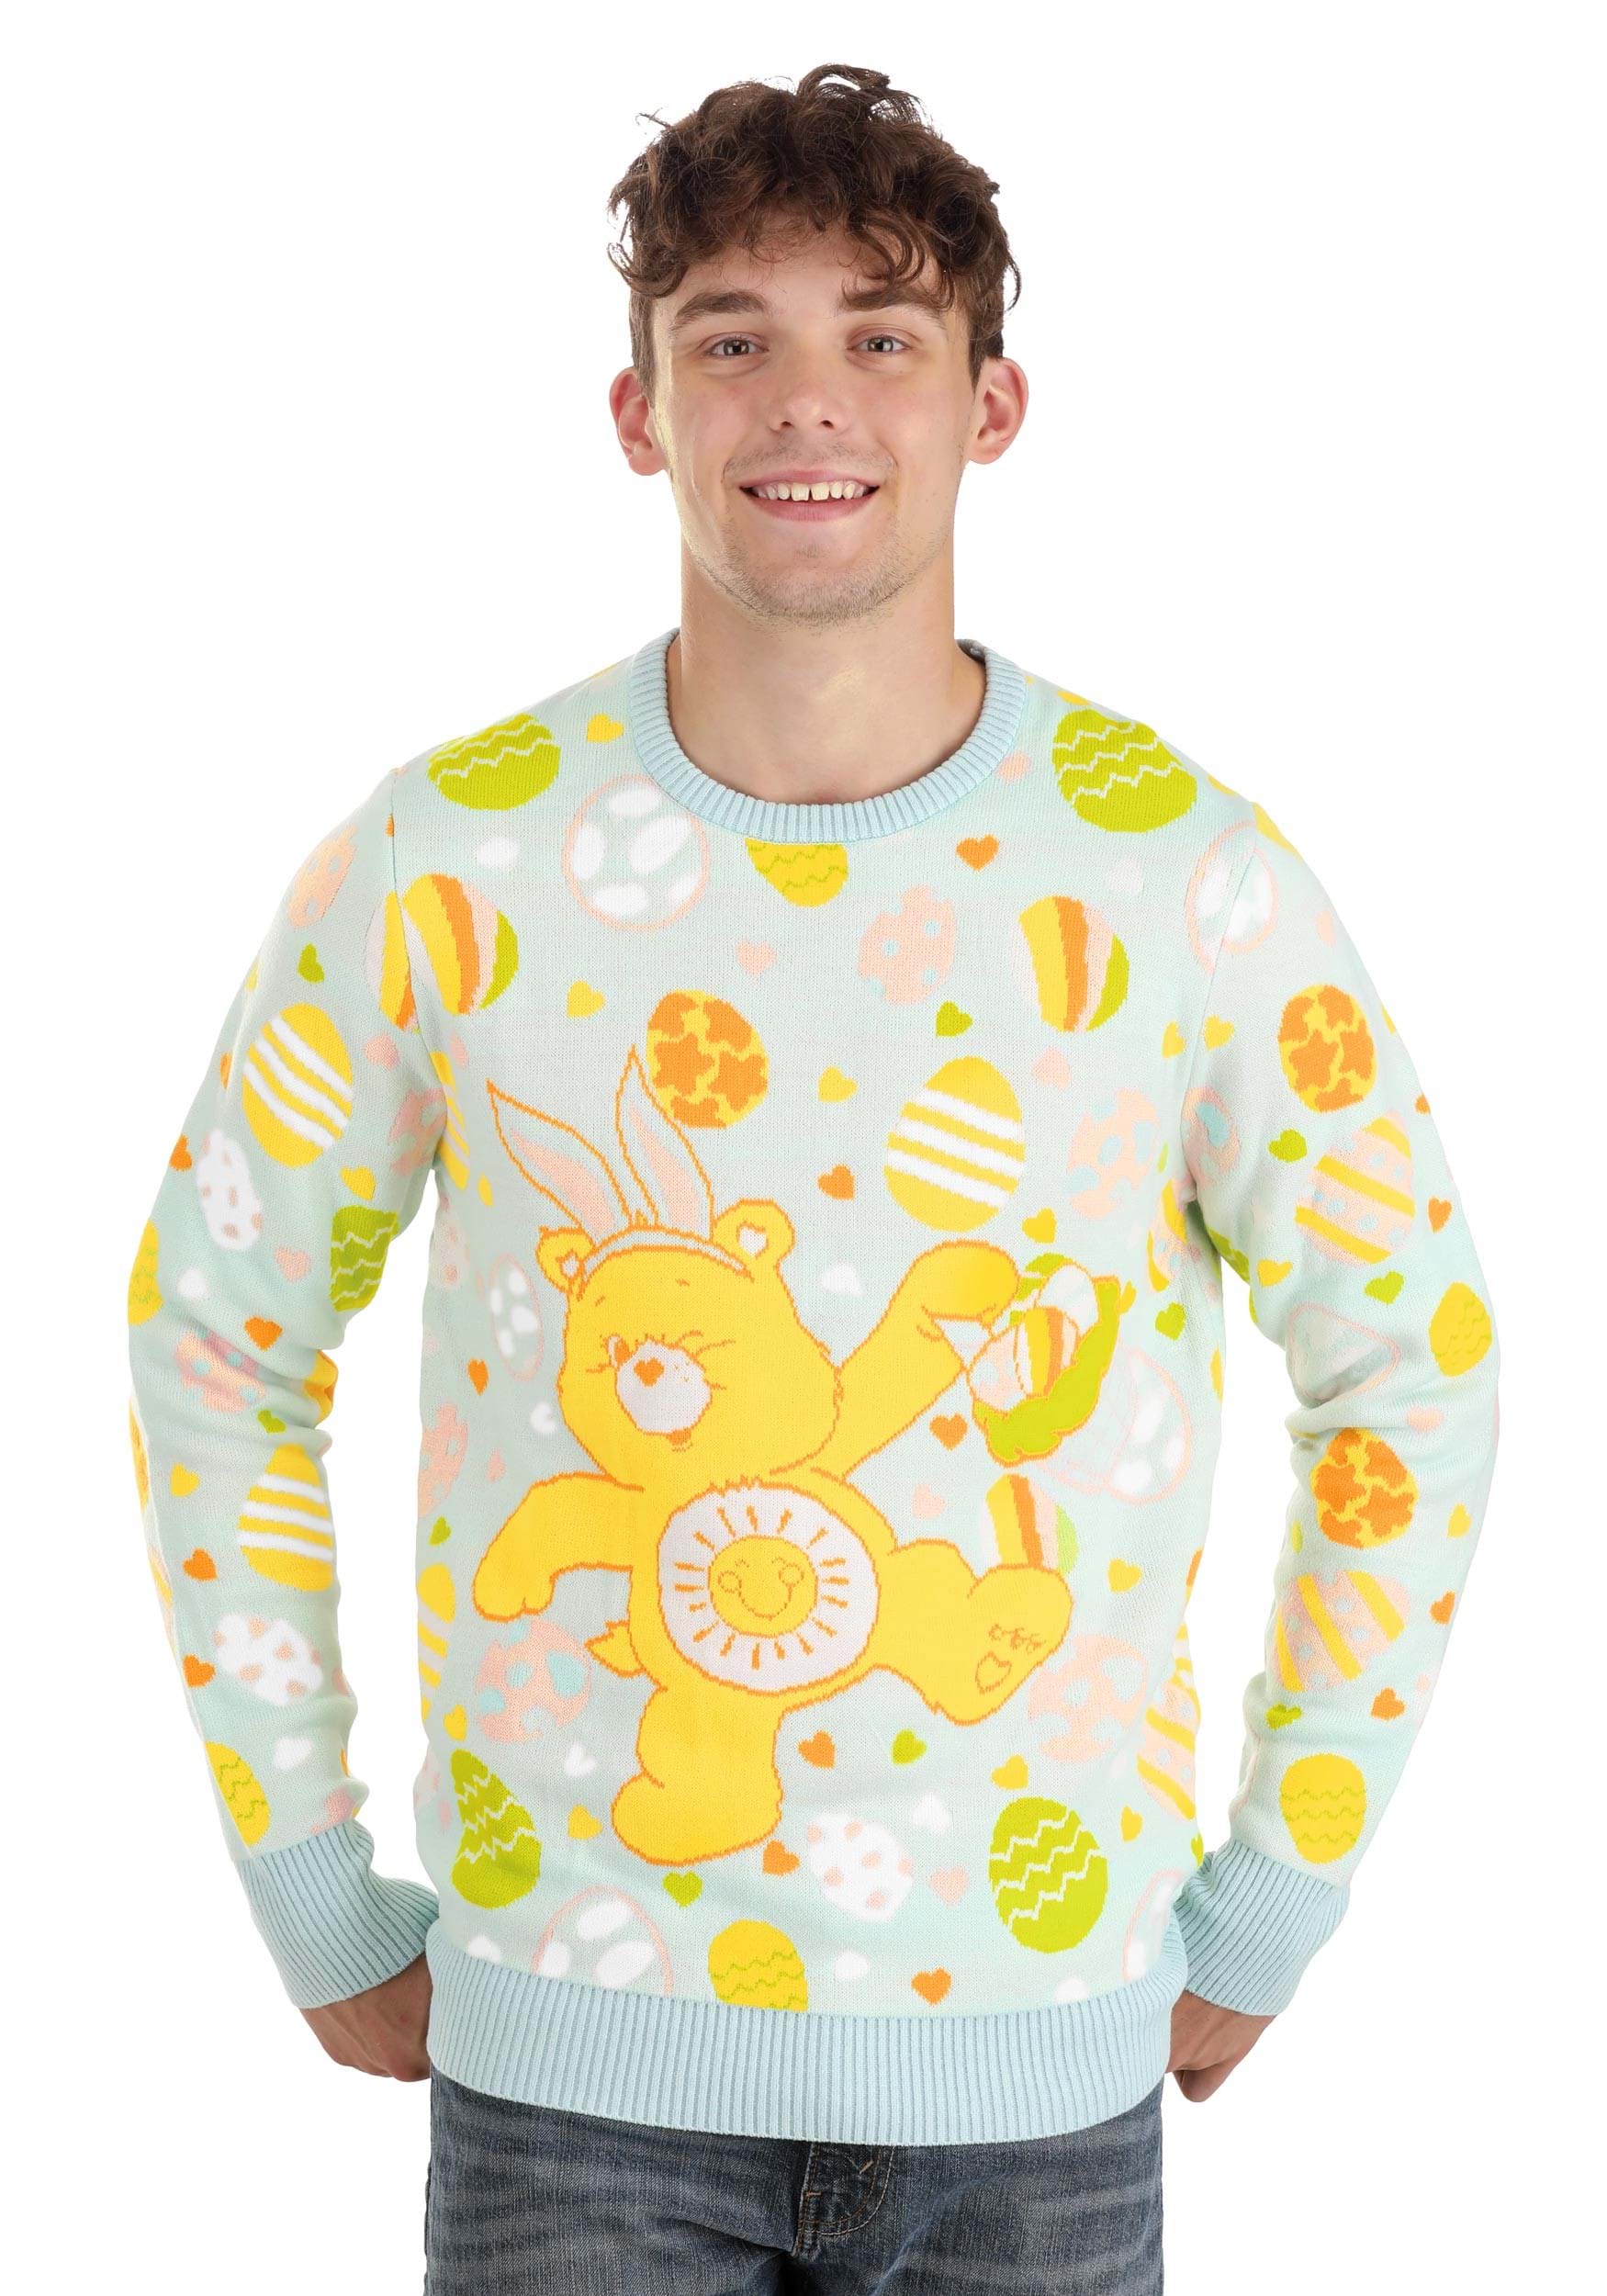 Adult Care Bears Easter Egg Hunt Ugly Sweater